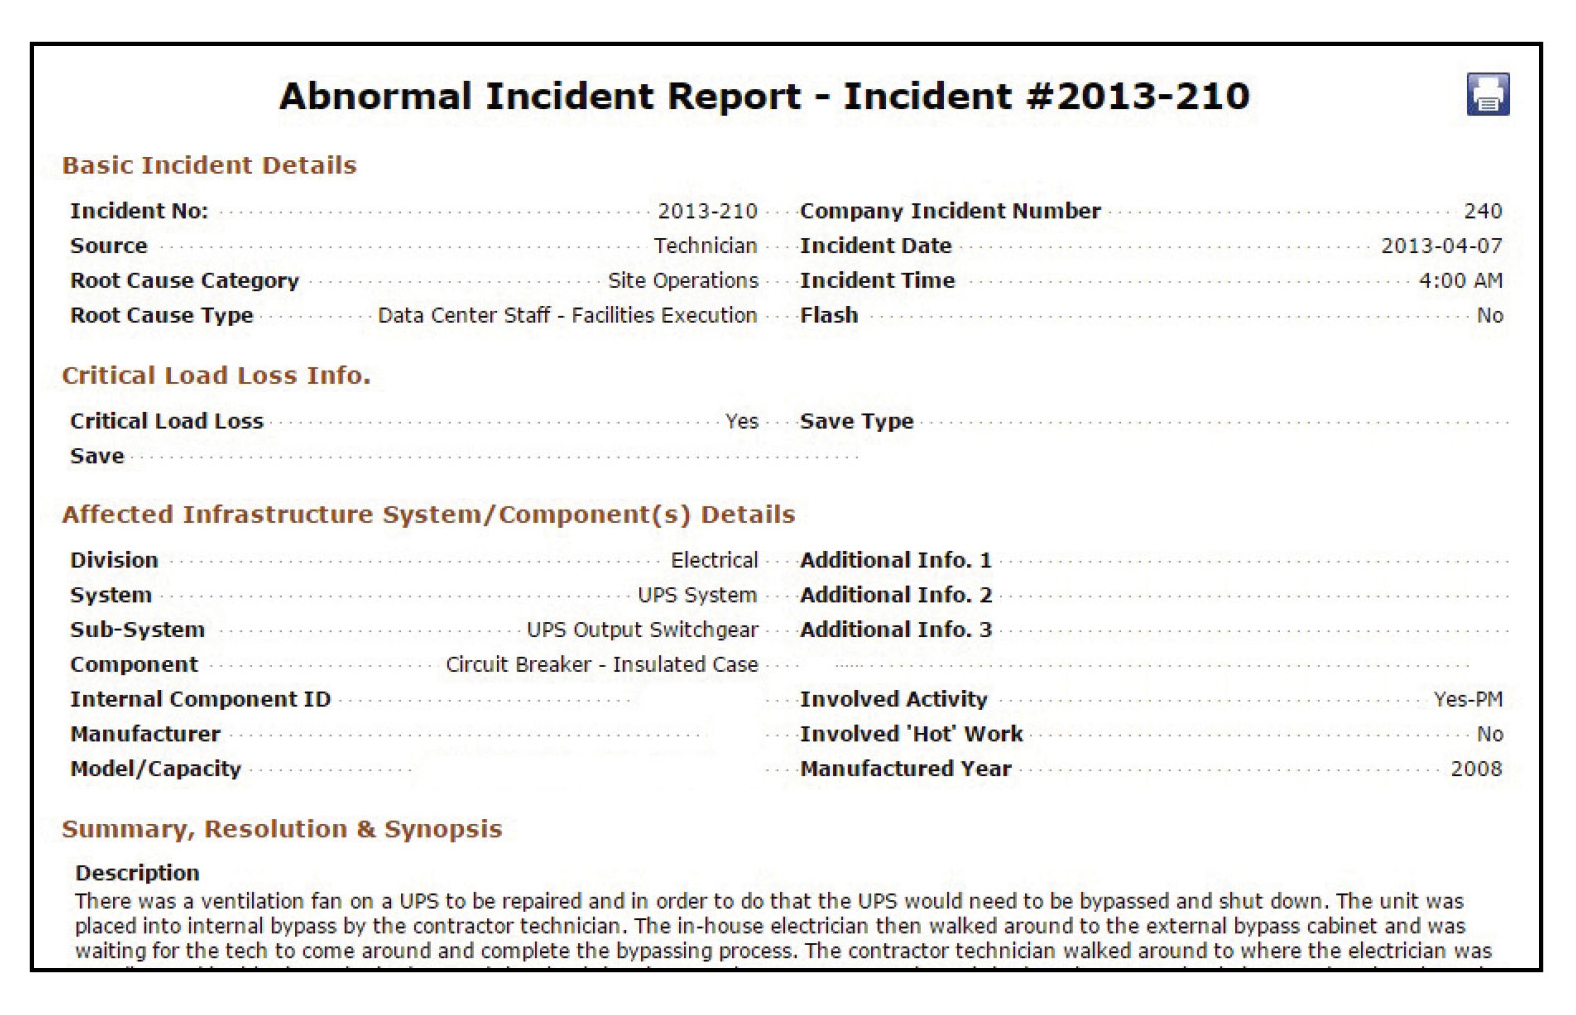 Figure 4. The overview page of the abnormal incident report selected for detailed analysis.